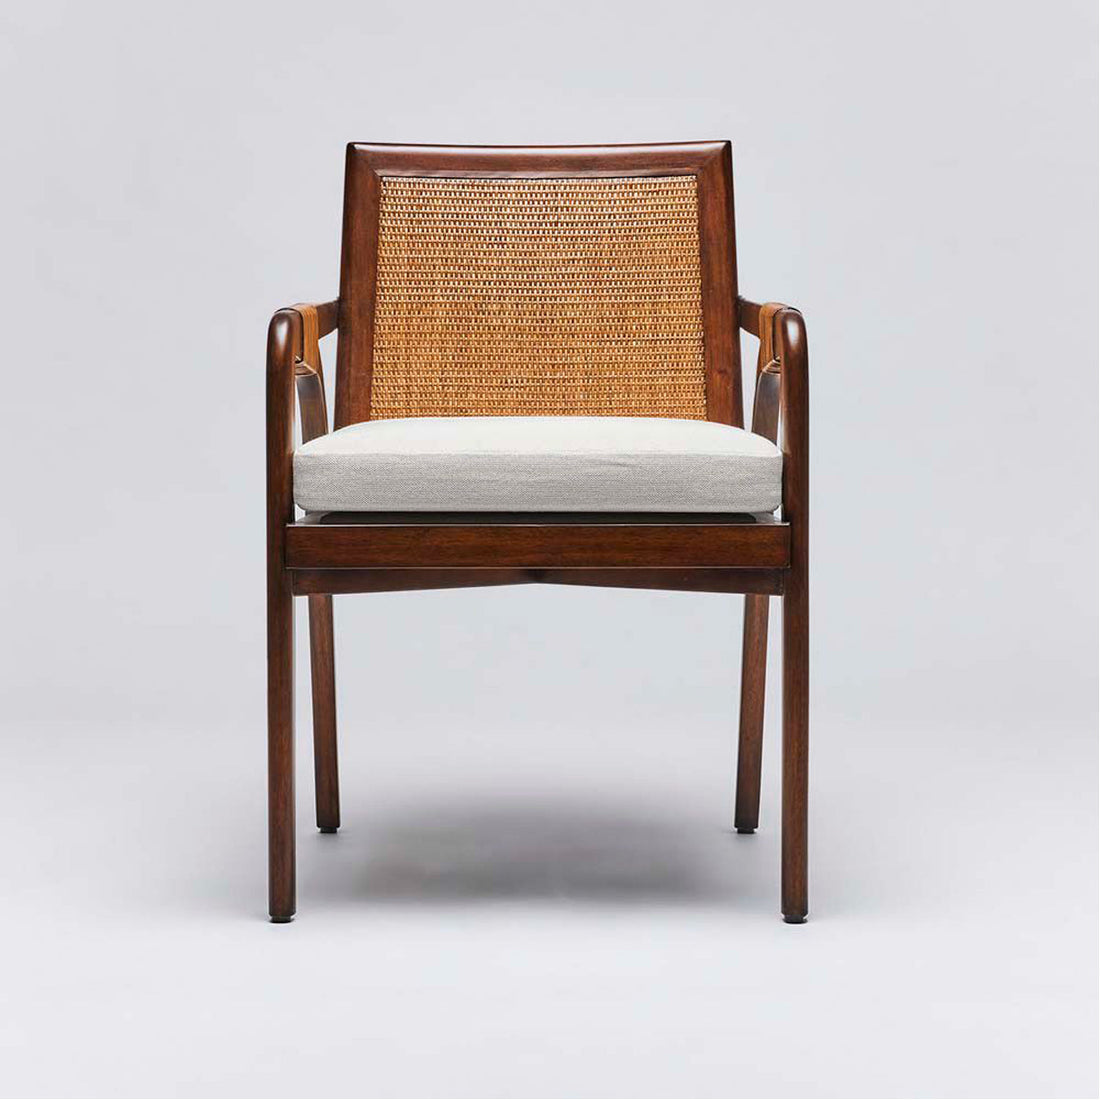 Interlude Home Delray Arm Chair